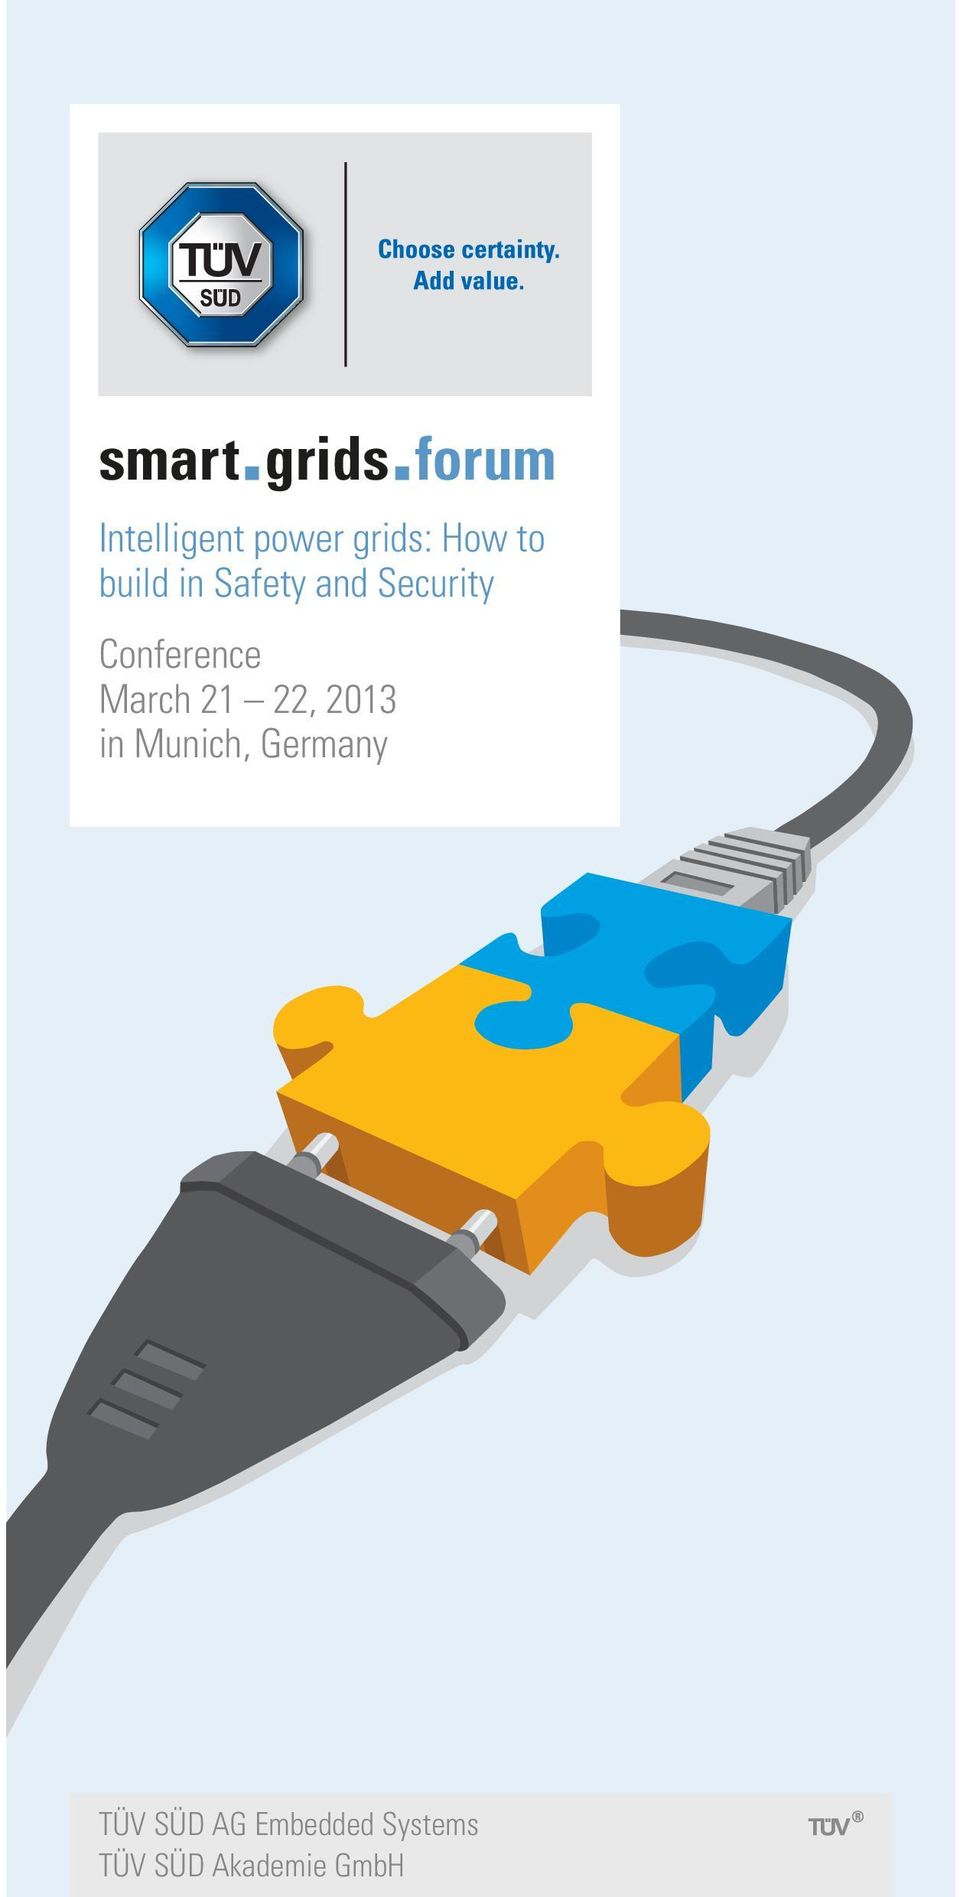 Conference March 21 22, 2013 in Munich,